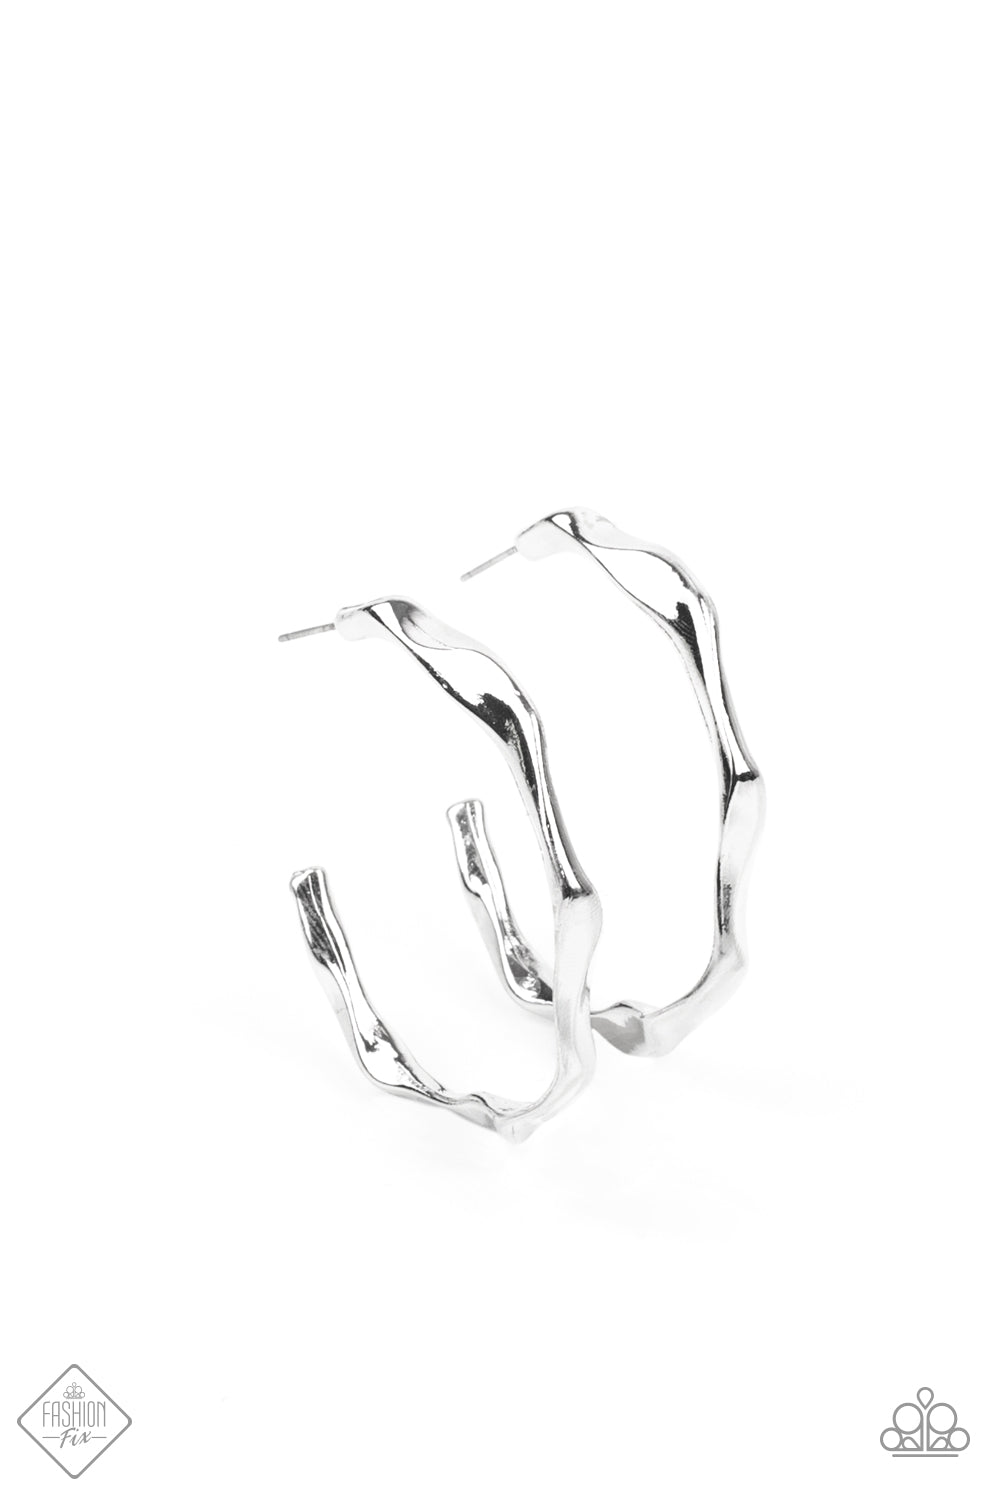 Coveted Curves - silver - Paparazzi earrings